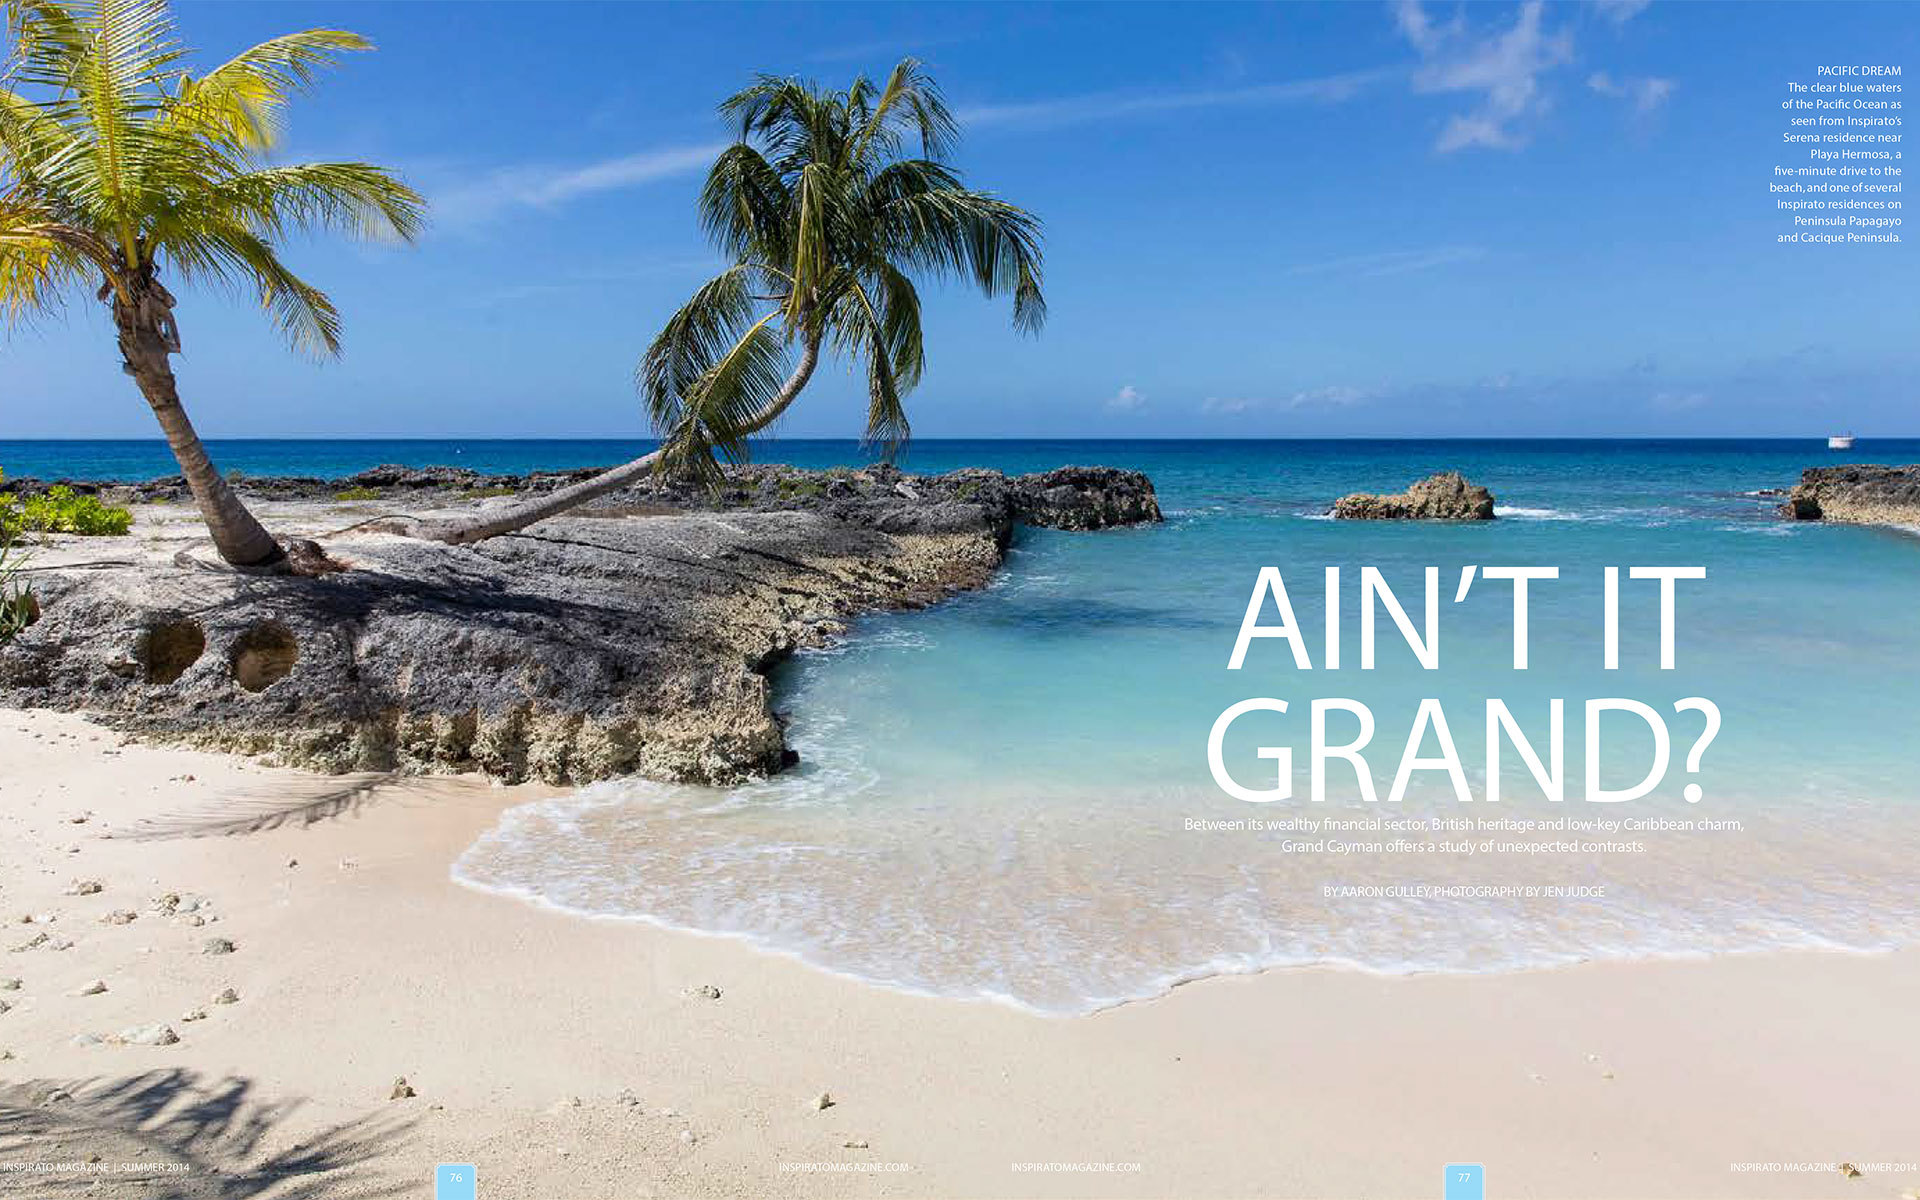 <p style="text-align: center;"><b><font color="2a2871">Aint It Grand?, Inspirato, Summer 2014</font></b>
</p>
Between its wealthy financial sector, British heritage, and low-key Caribbean charm, Grand Cayman offers a study of unexpected contrasts.
<p style="text-align: center;"><a href="/users/AaronGulley18670/INS_Cayman_Summer14.pdf" onclick="window.open(this.href, '', 'resizable=no,status=no,location=no,toolbar=no,menubar=no,fullscreen=no,scrollbars=no,dependent=no,width=900'); return false;">Read the Story</a></p>
